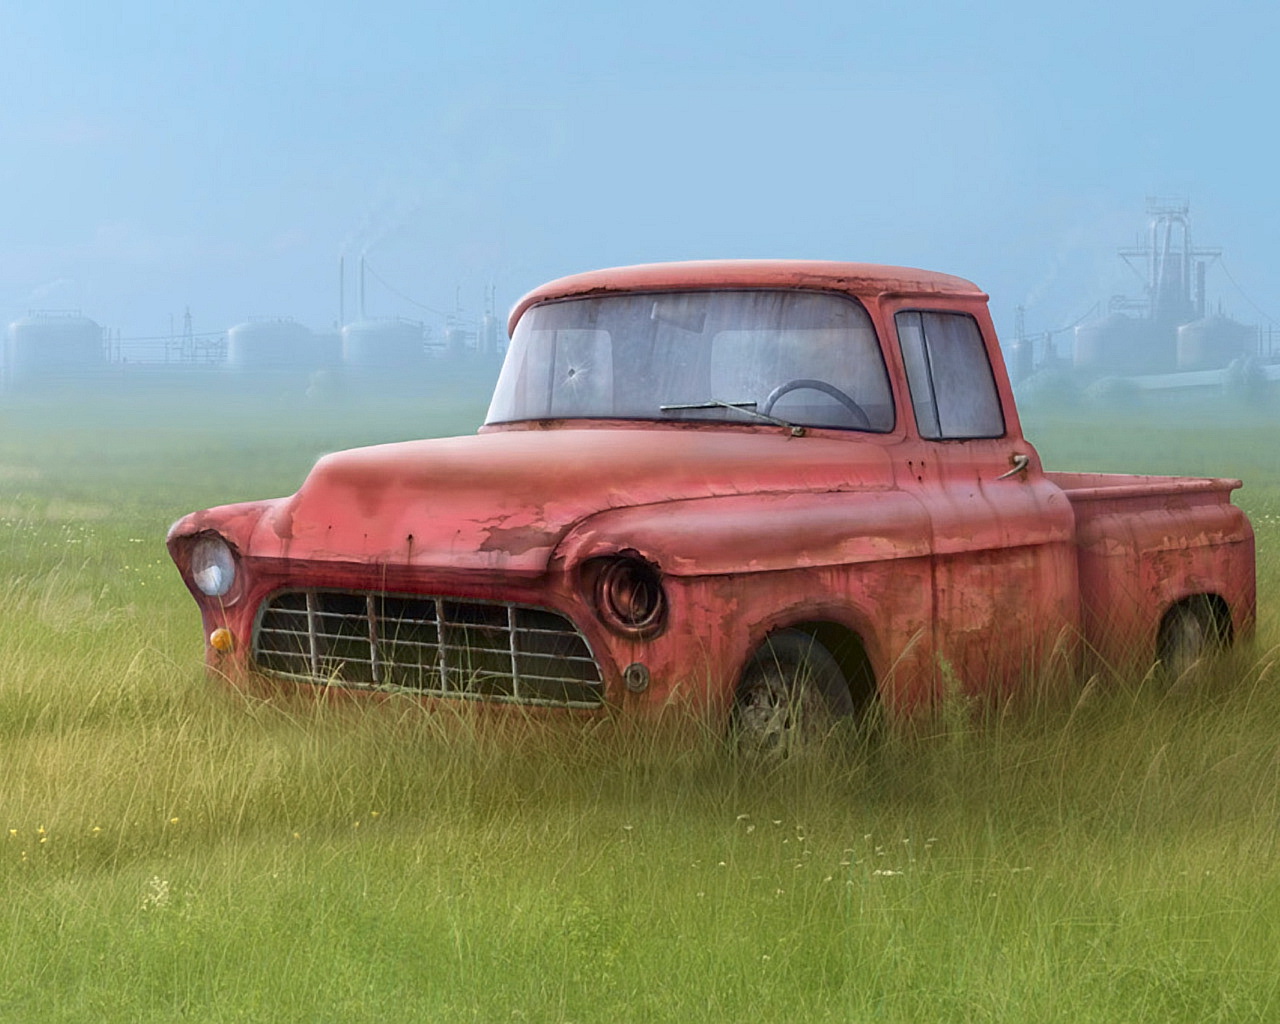 Old Car In The Grass   1280x1024   54 1280x1024